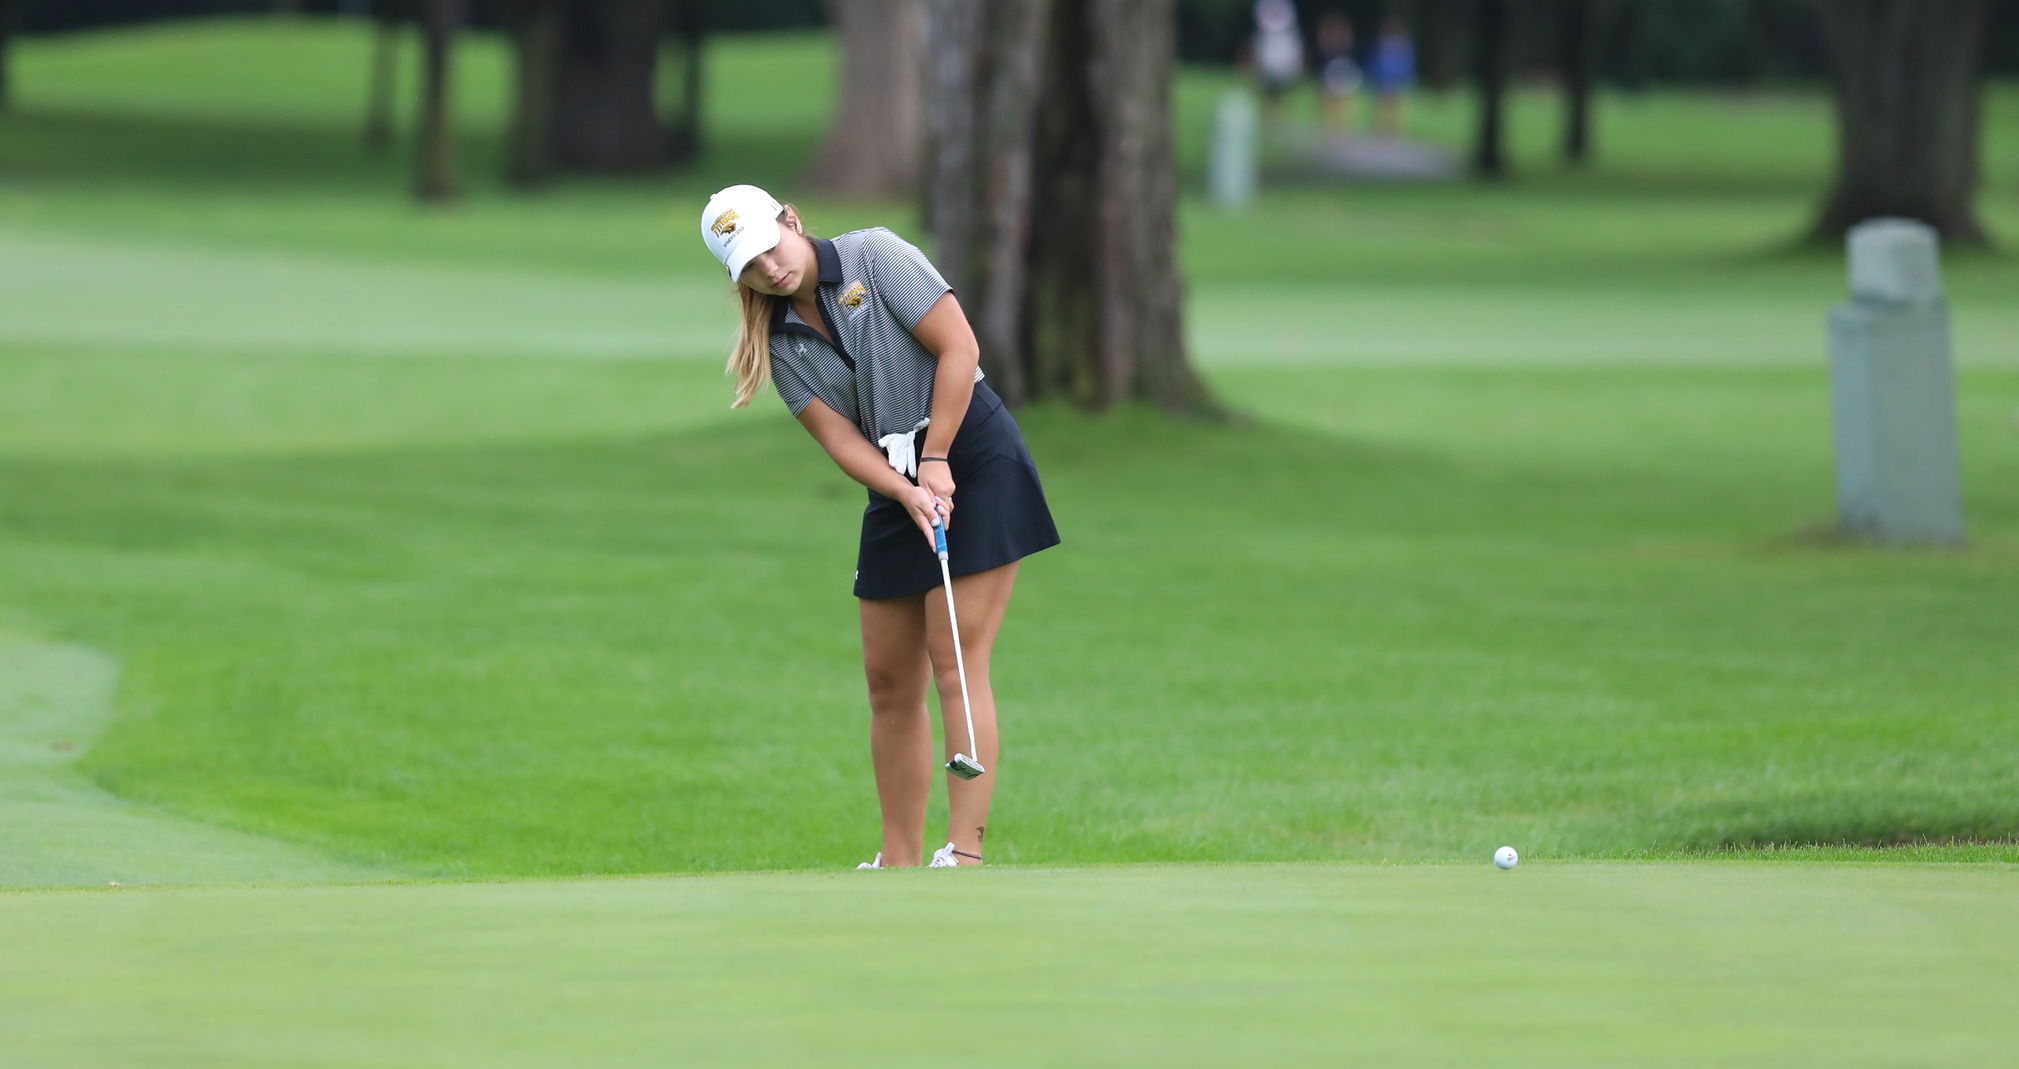 Margherite Pettenuzzo’s career-best 18-hole score of 77 strokes placed her 13th among 92 golfers.